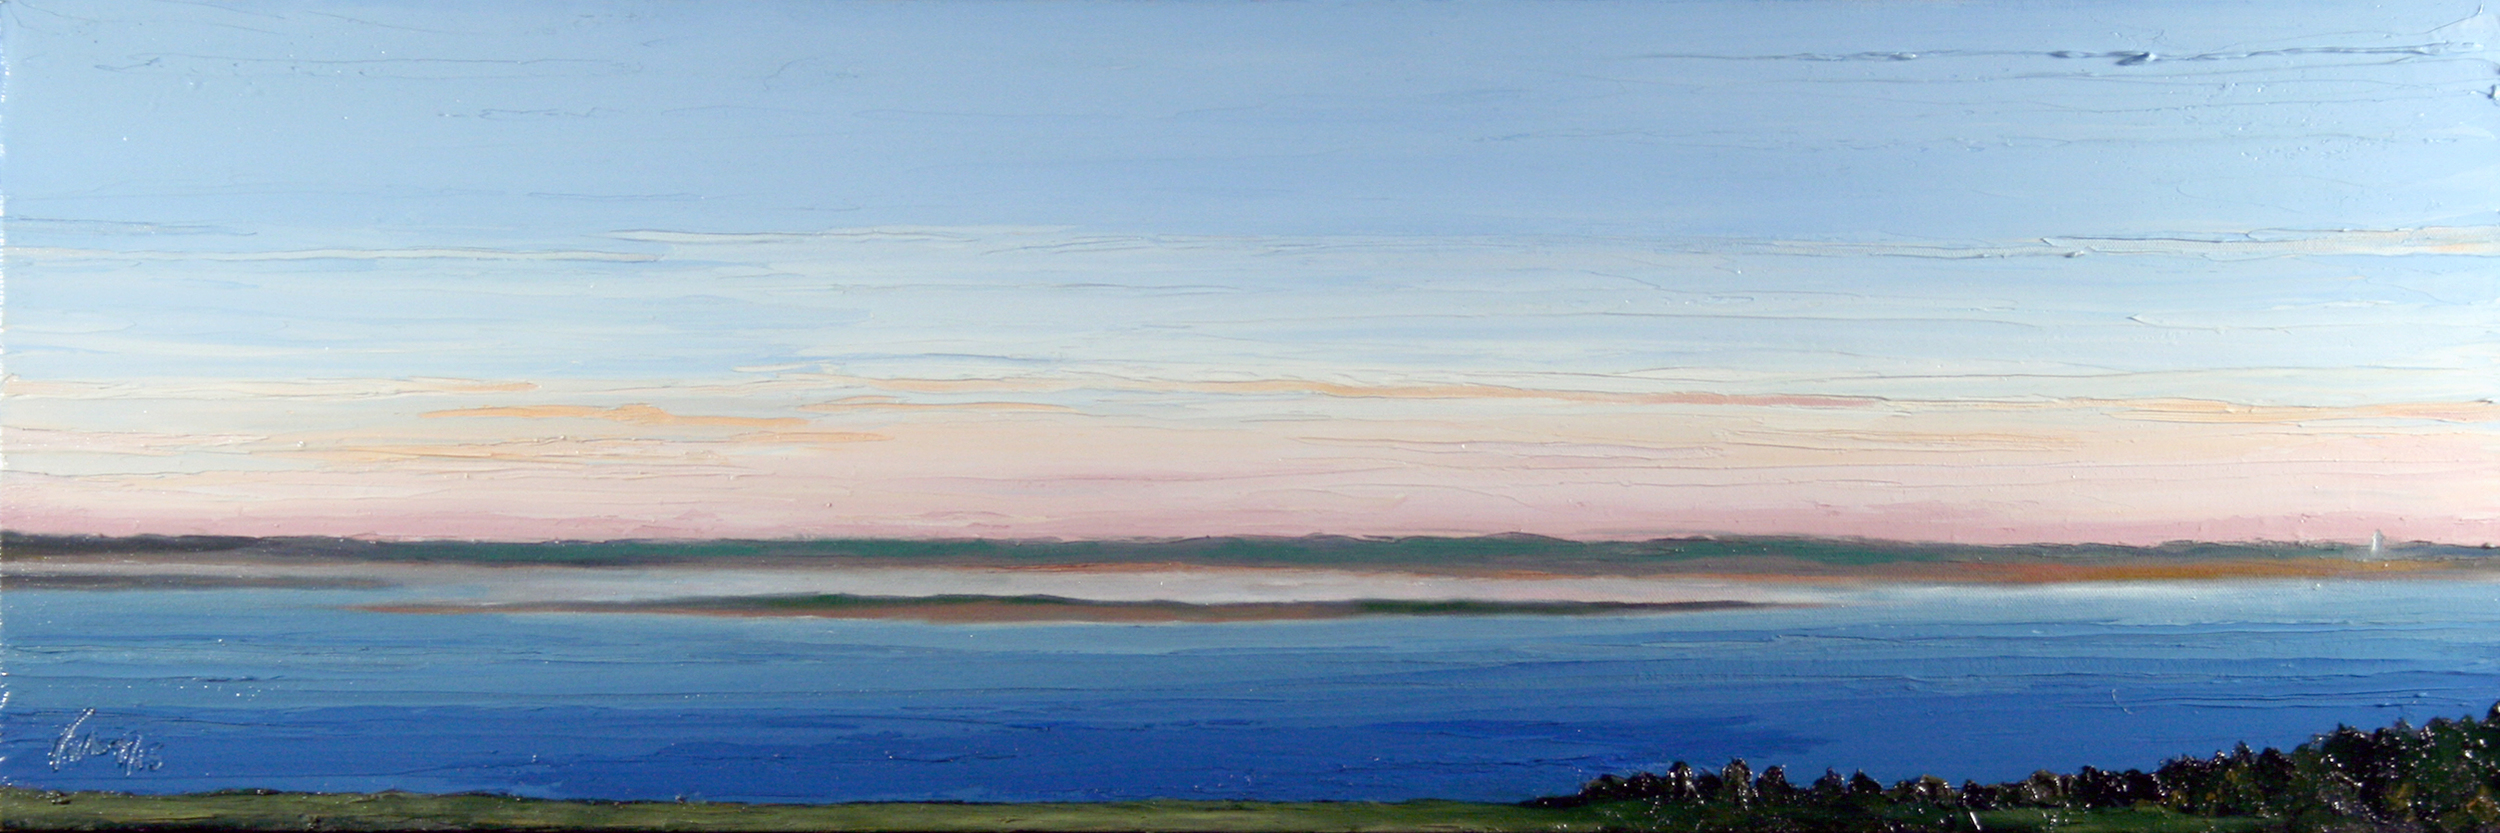 Donahue View - Barnstable MA to Chatham Light, oil on canvas, 12 by 36 inches, 2015